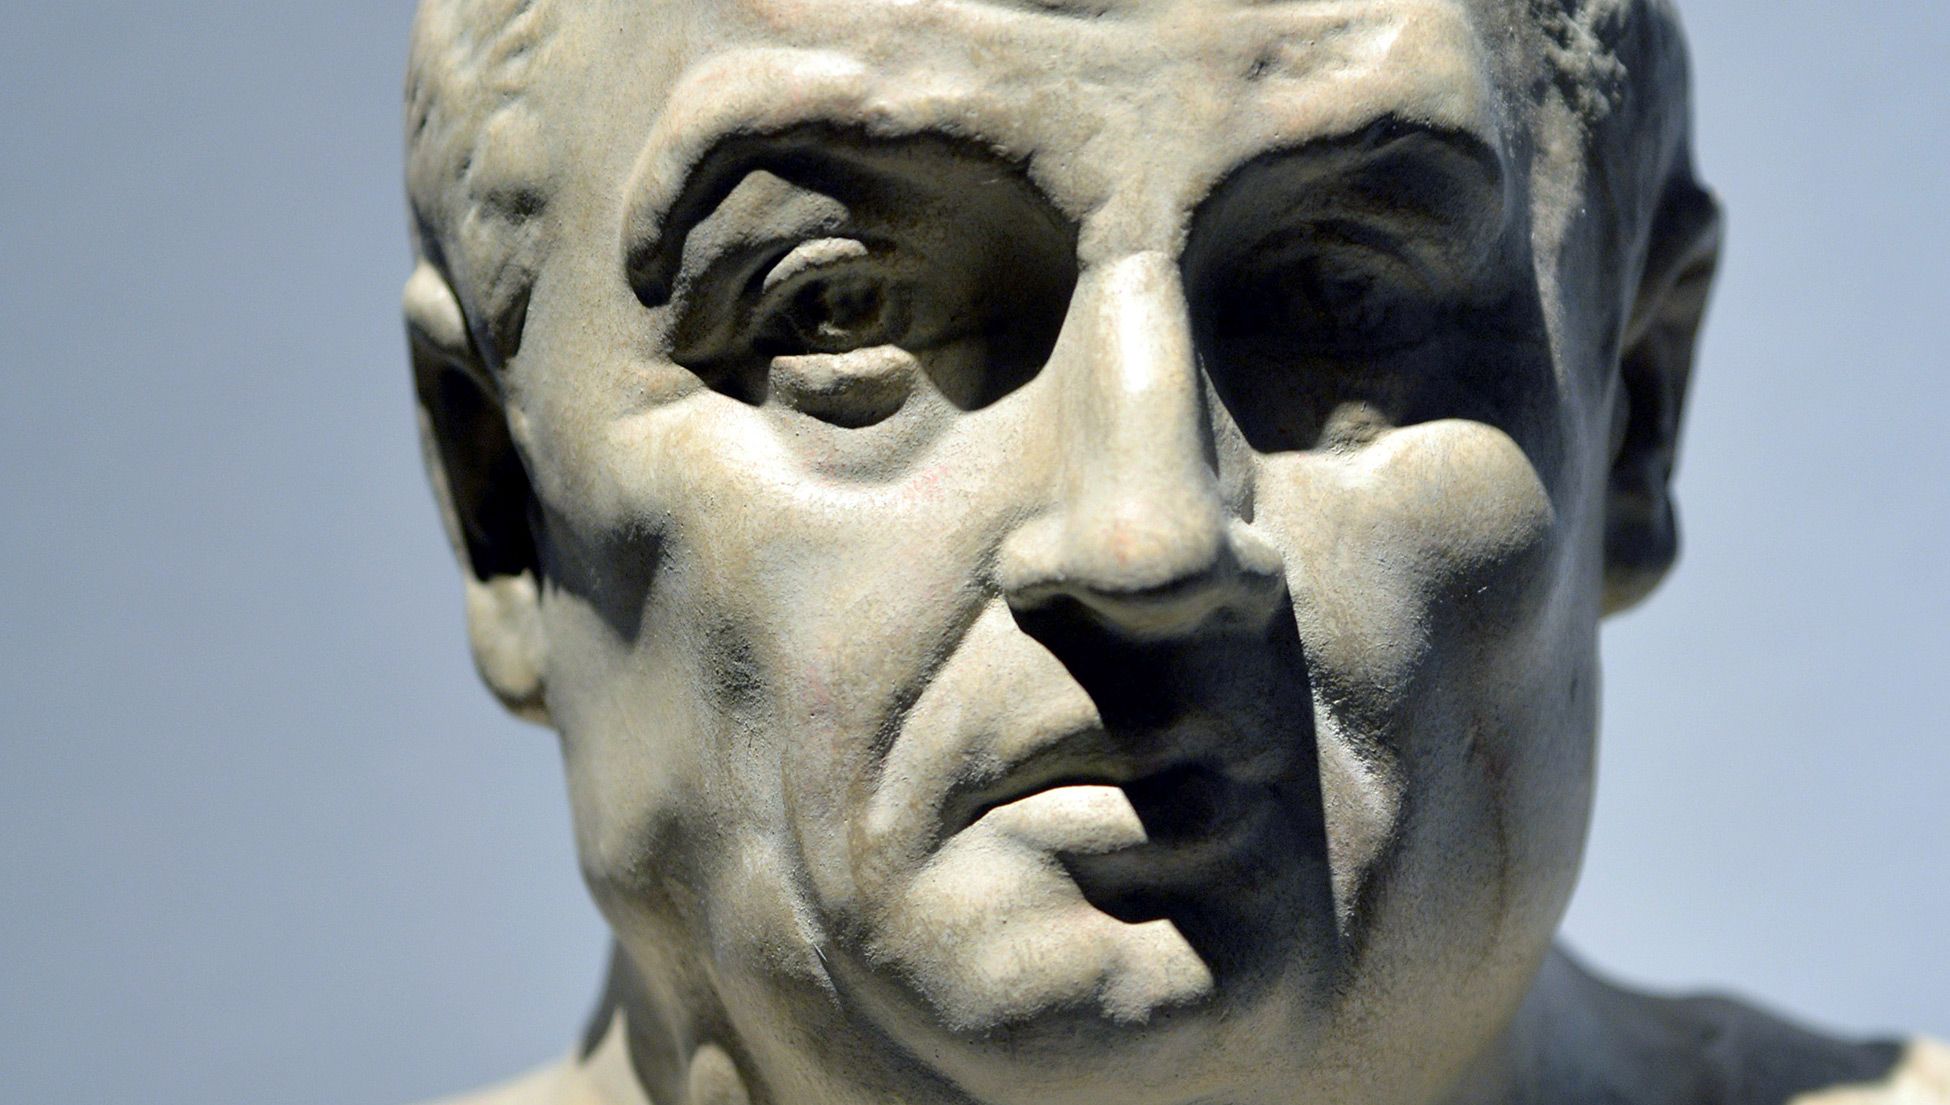 Don’t be stoic: Roman Stoicism’s origins show its perniciousness | Psyche